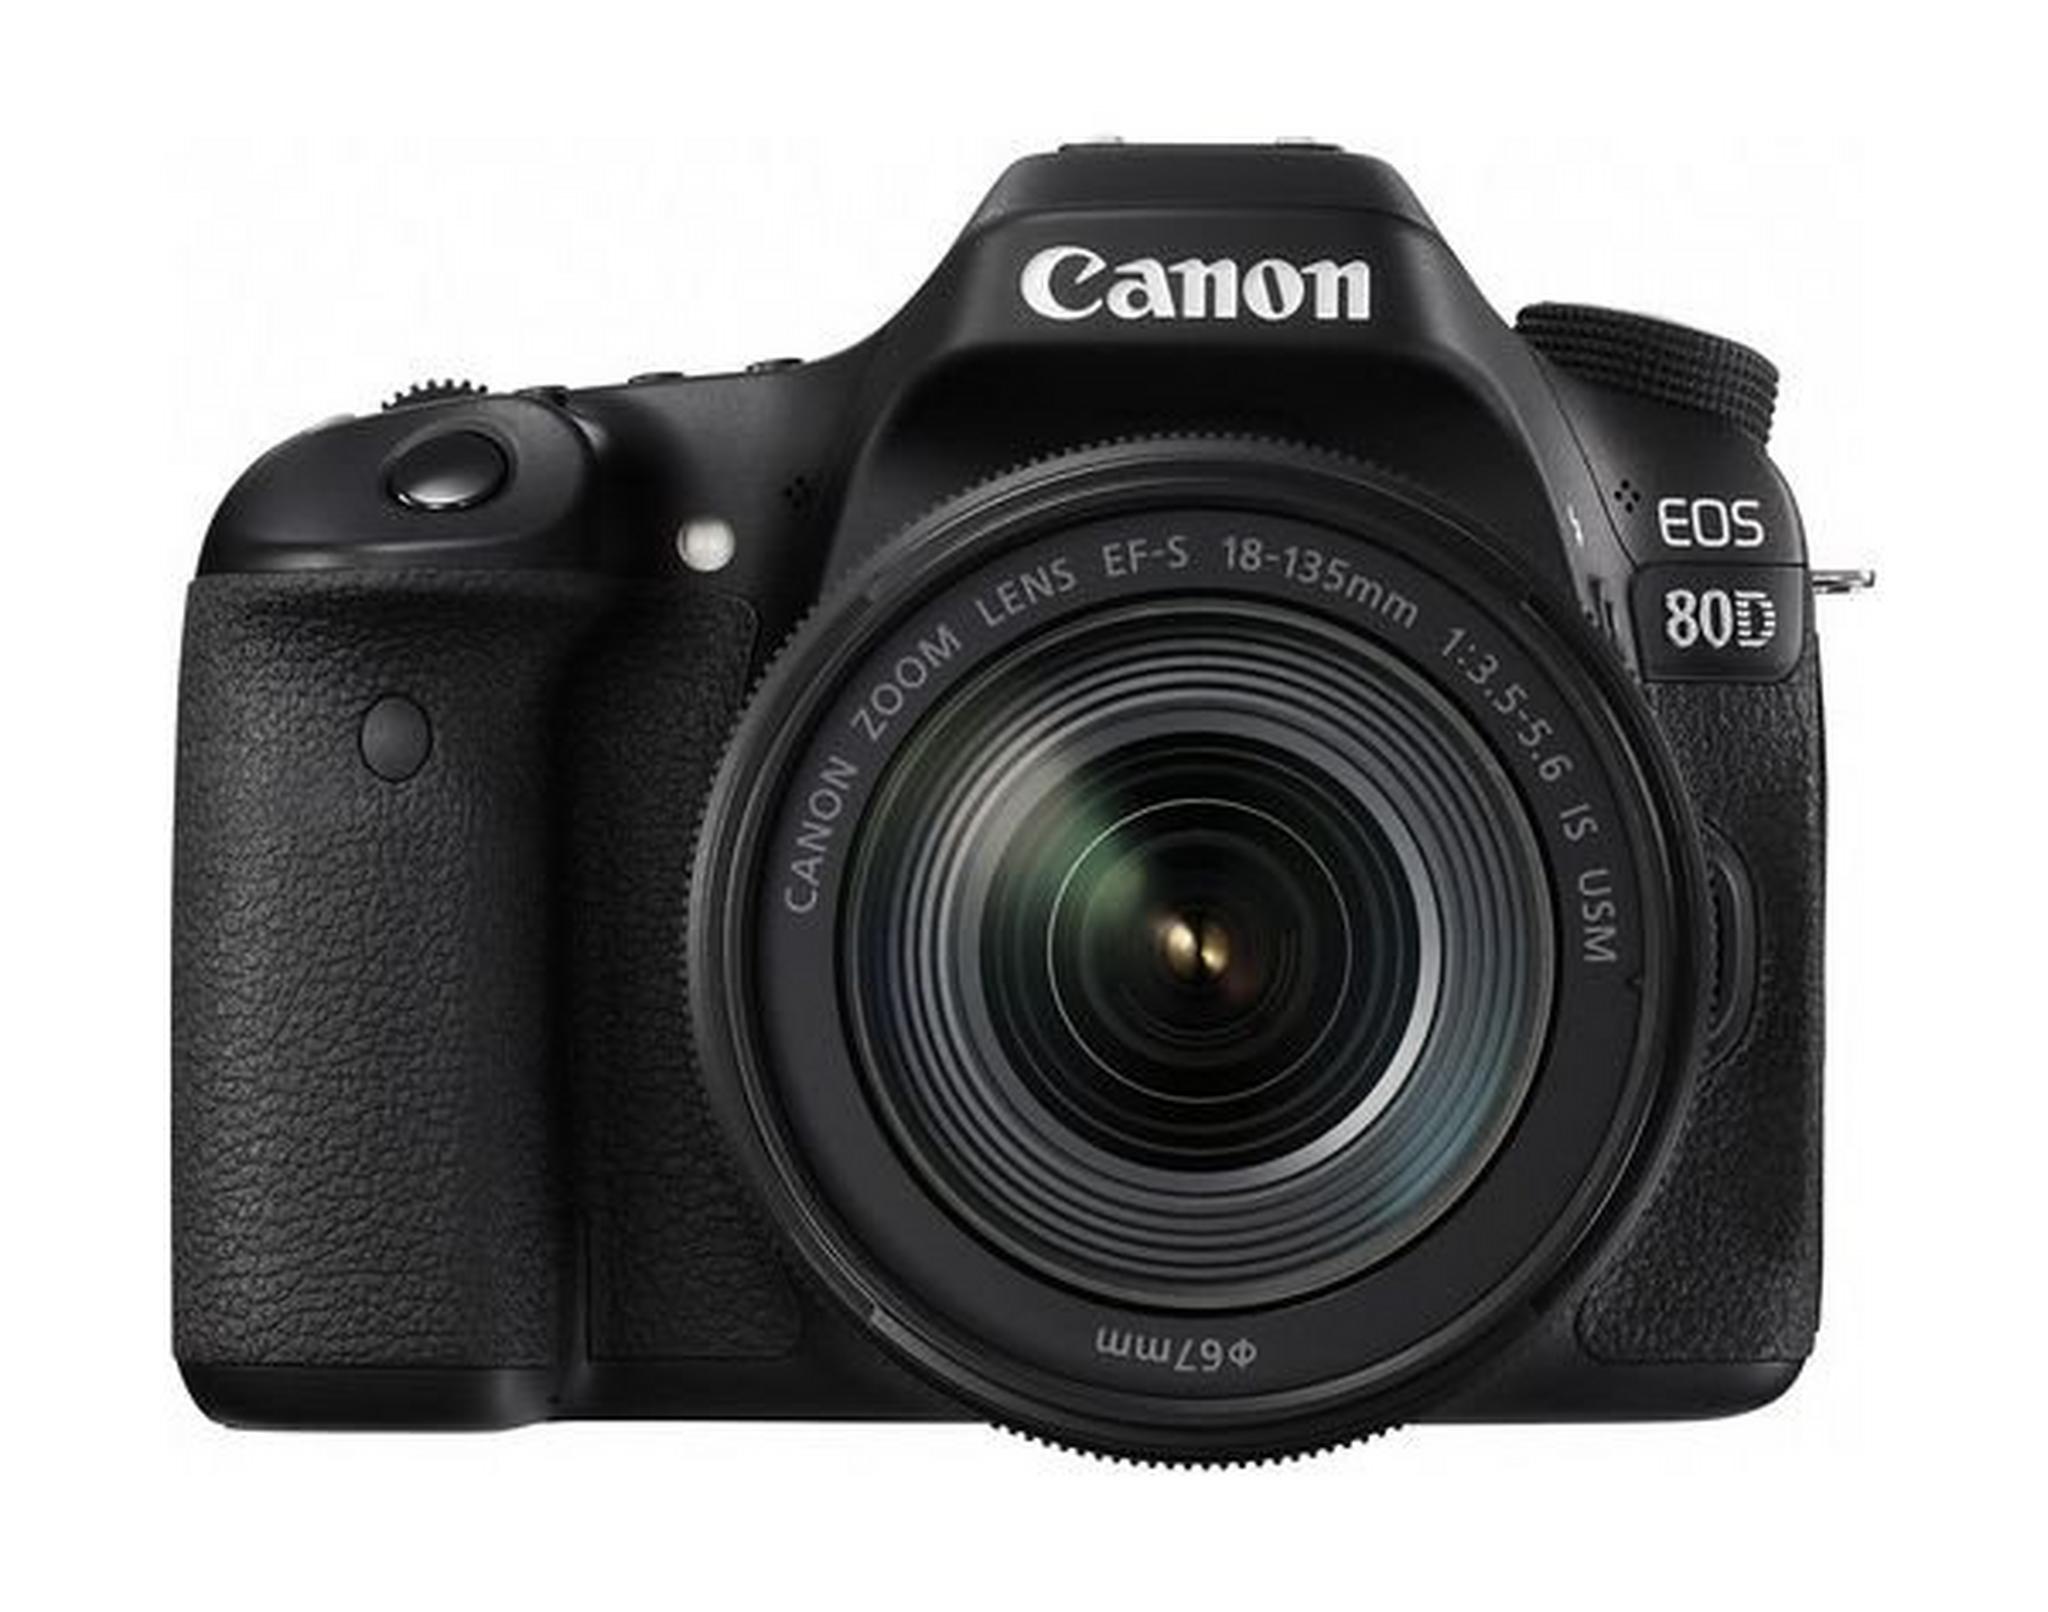 Canon EOS 80D 24.2MP WiFi DSLR Camera with 18-135mm Lens - Black